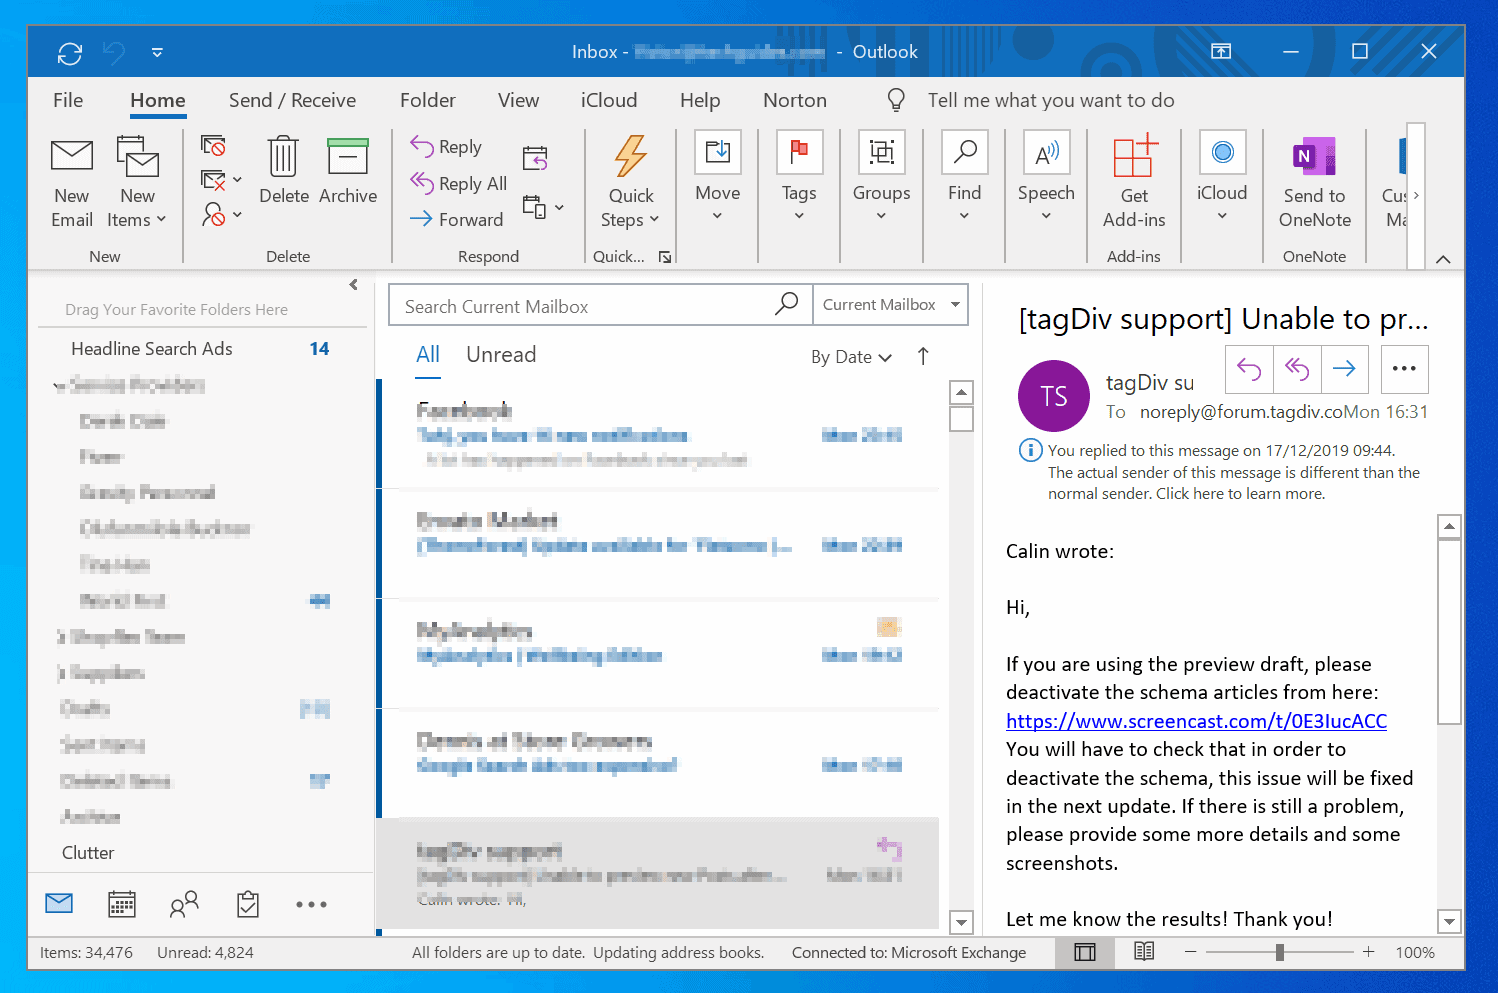 How to Send a Calendar Invite in Outlook (Windows 10 PC, Outlook Apps)